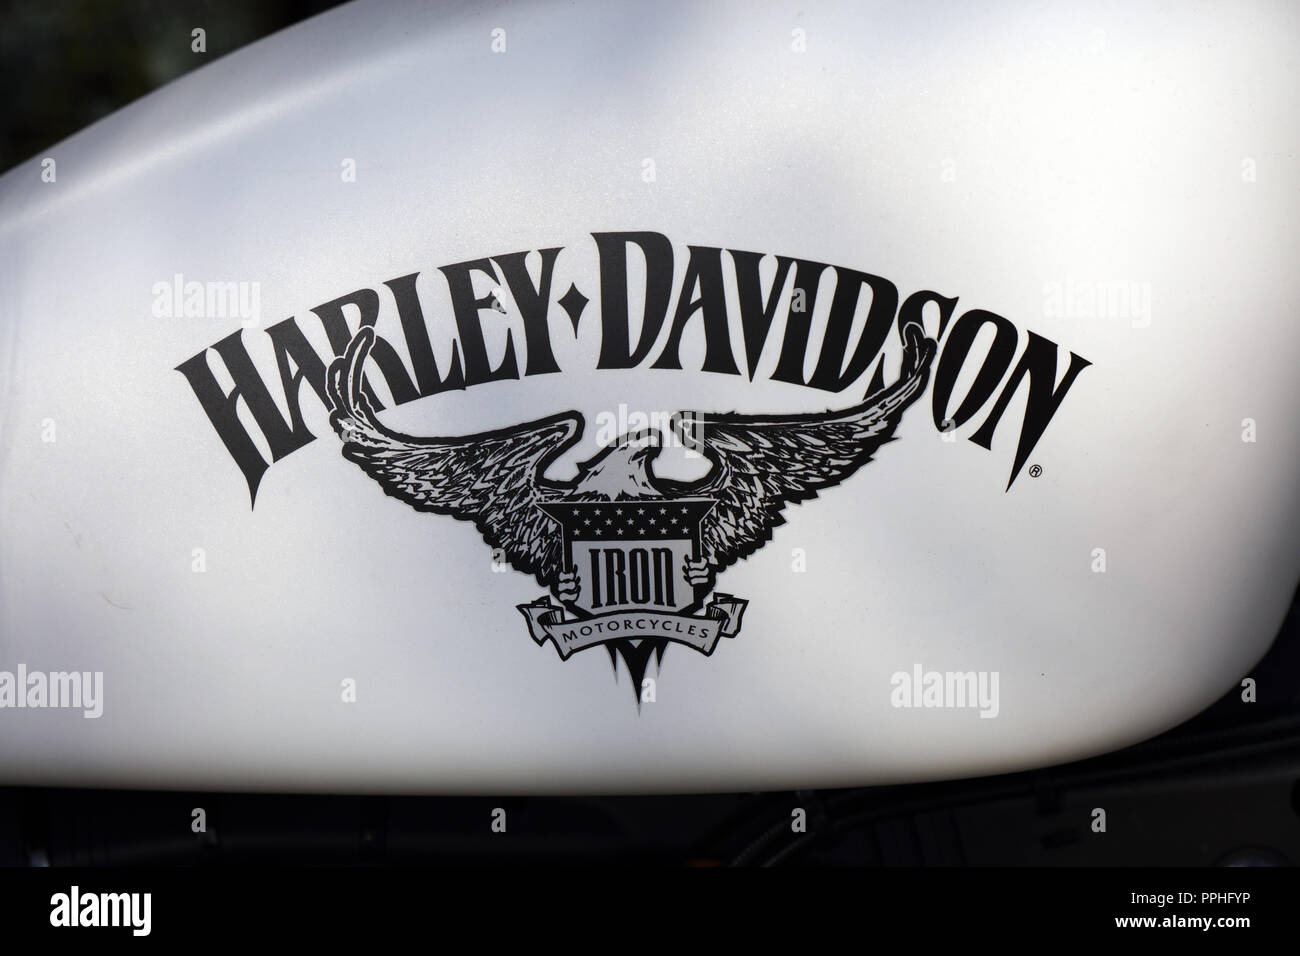 Paris, France, 21 september 2018: Letters Harley Davidson on a  motor cycle tank Stock Photo